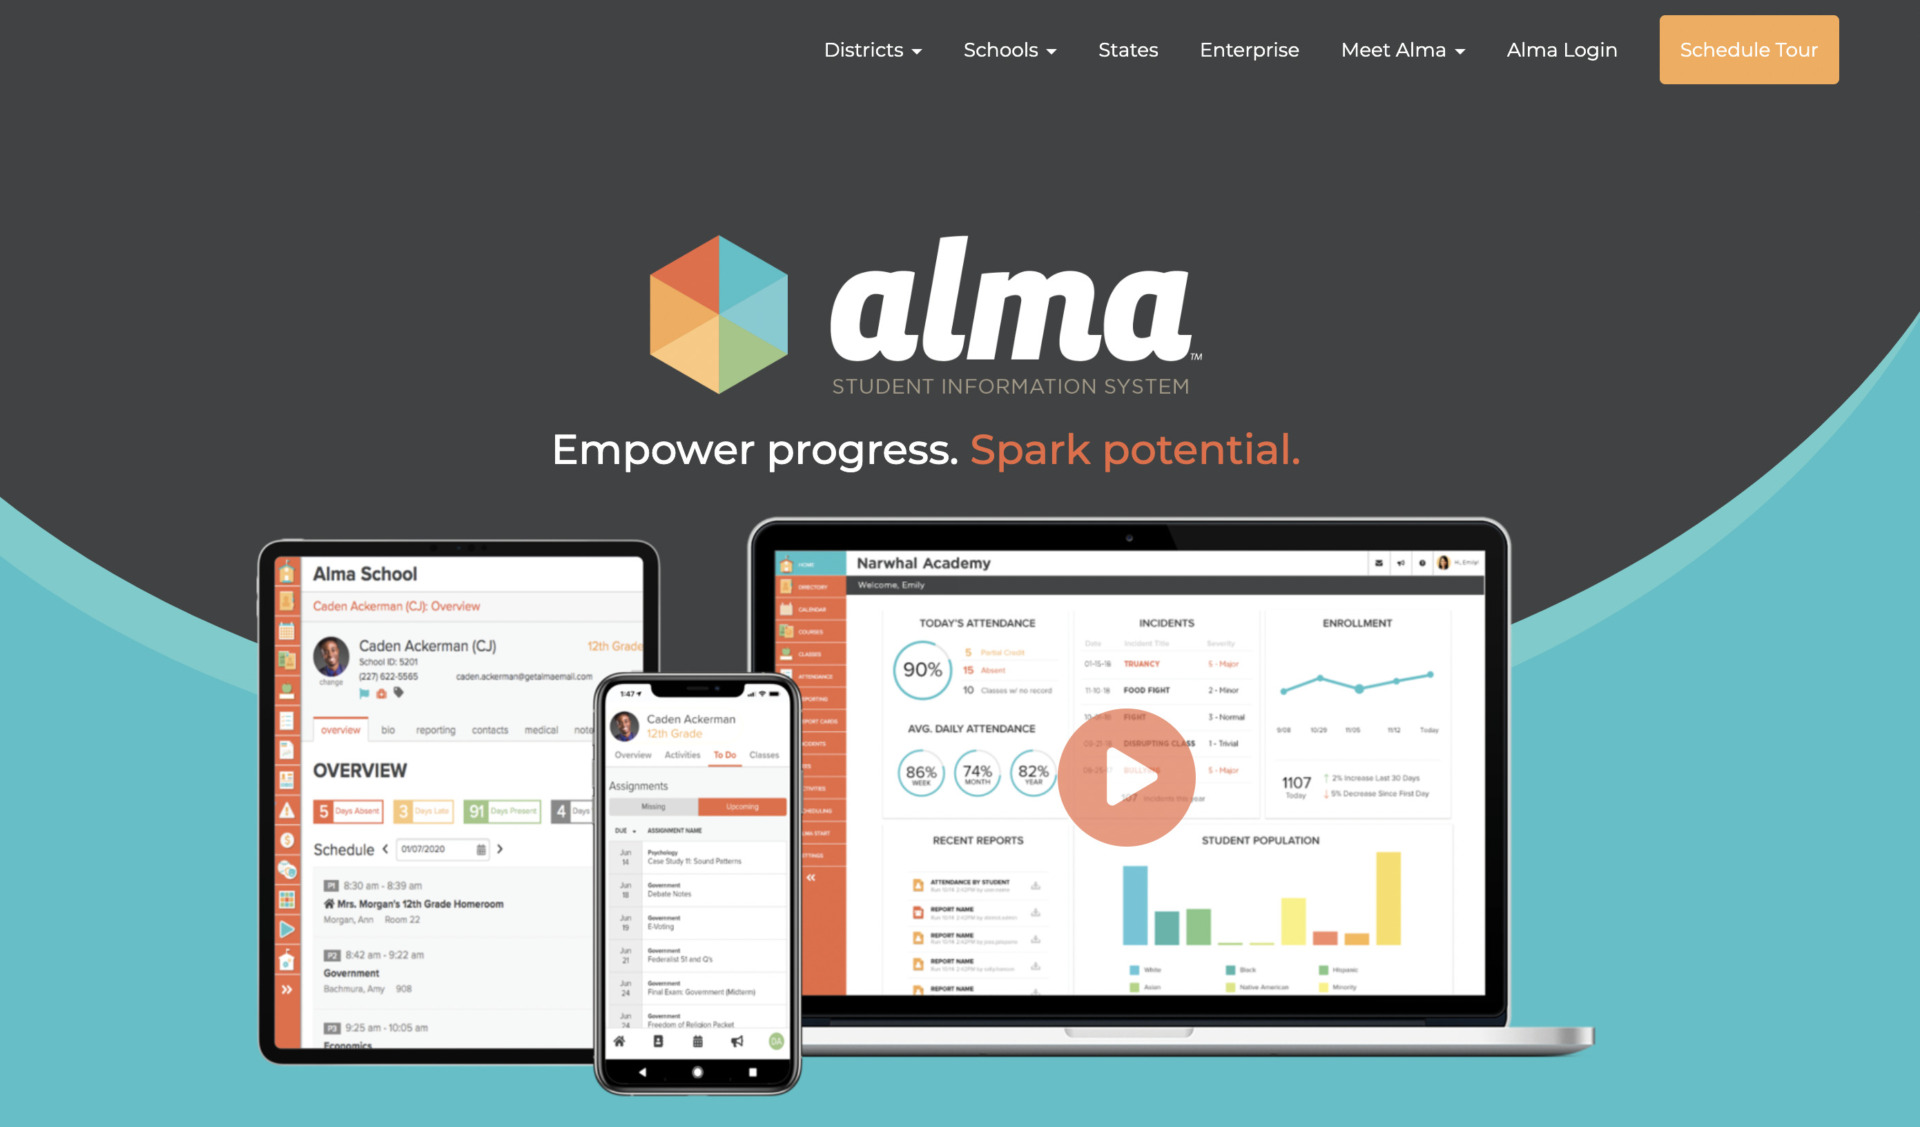 Top page of Alma